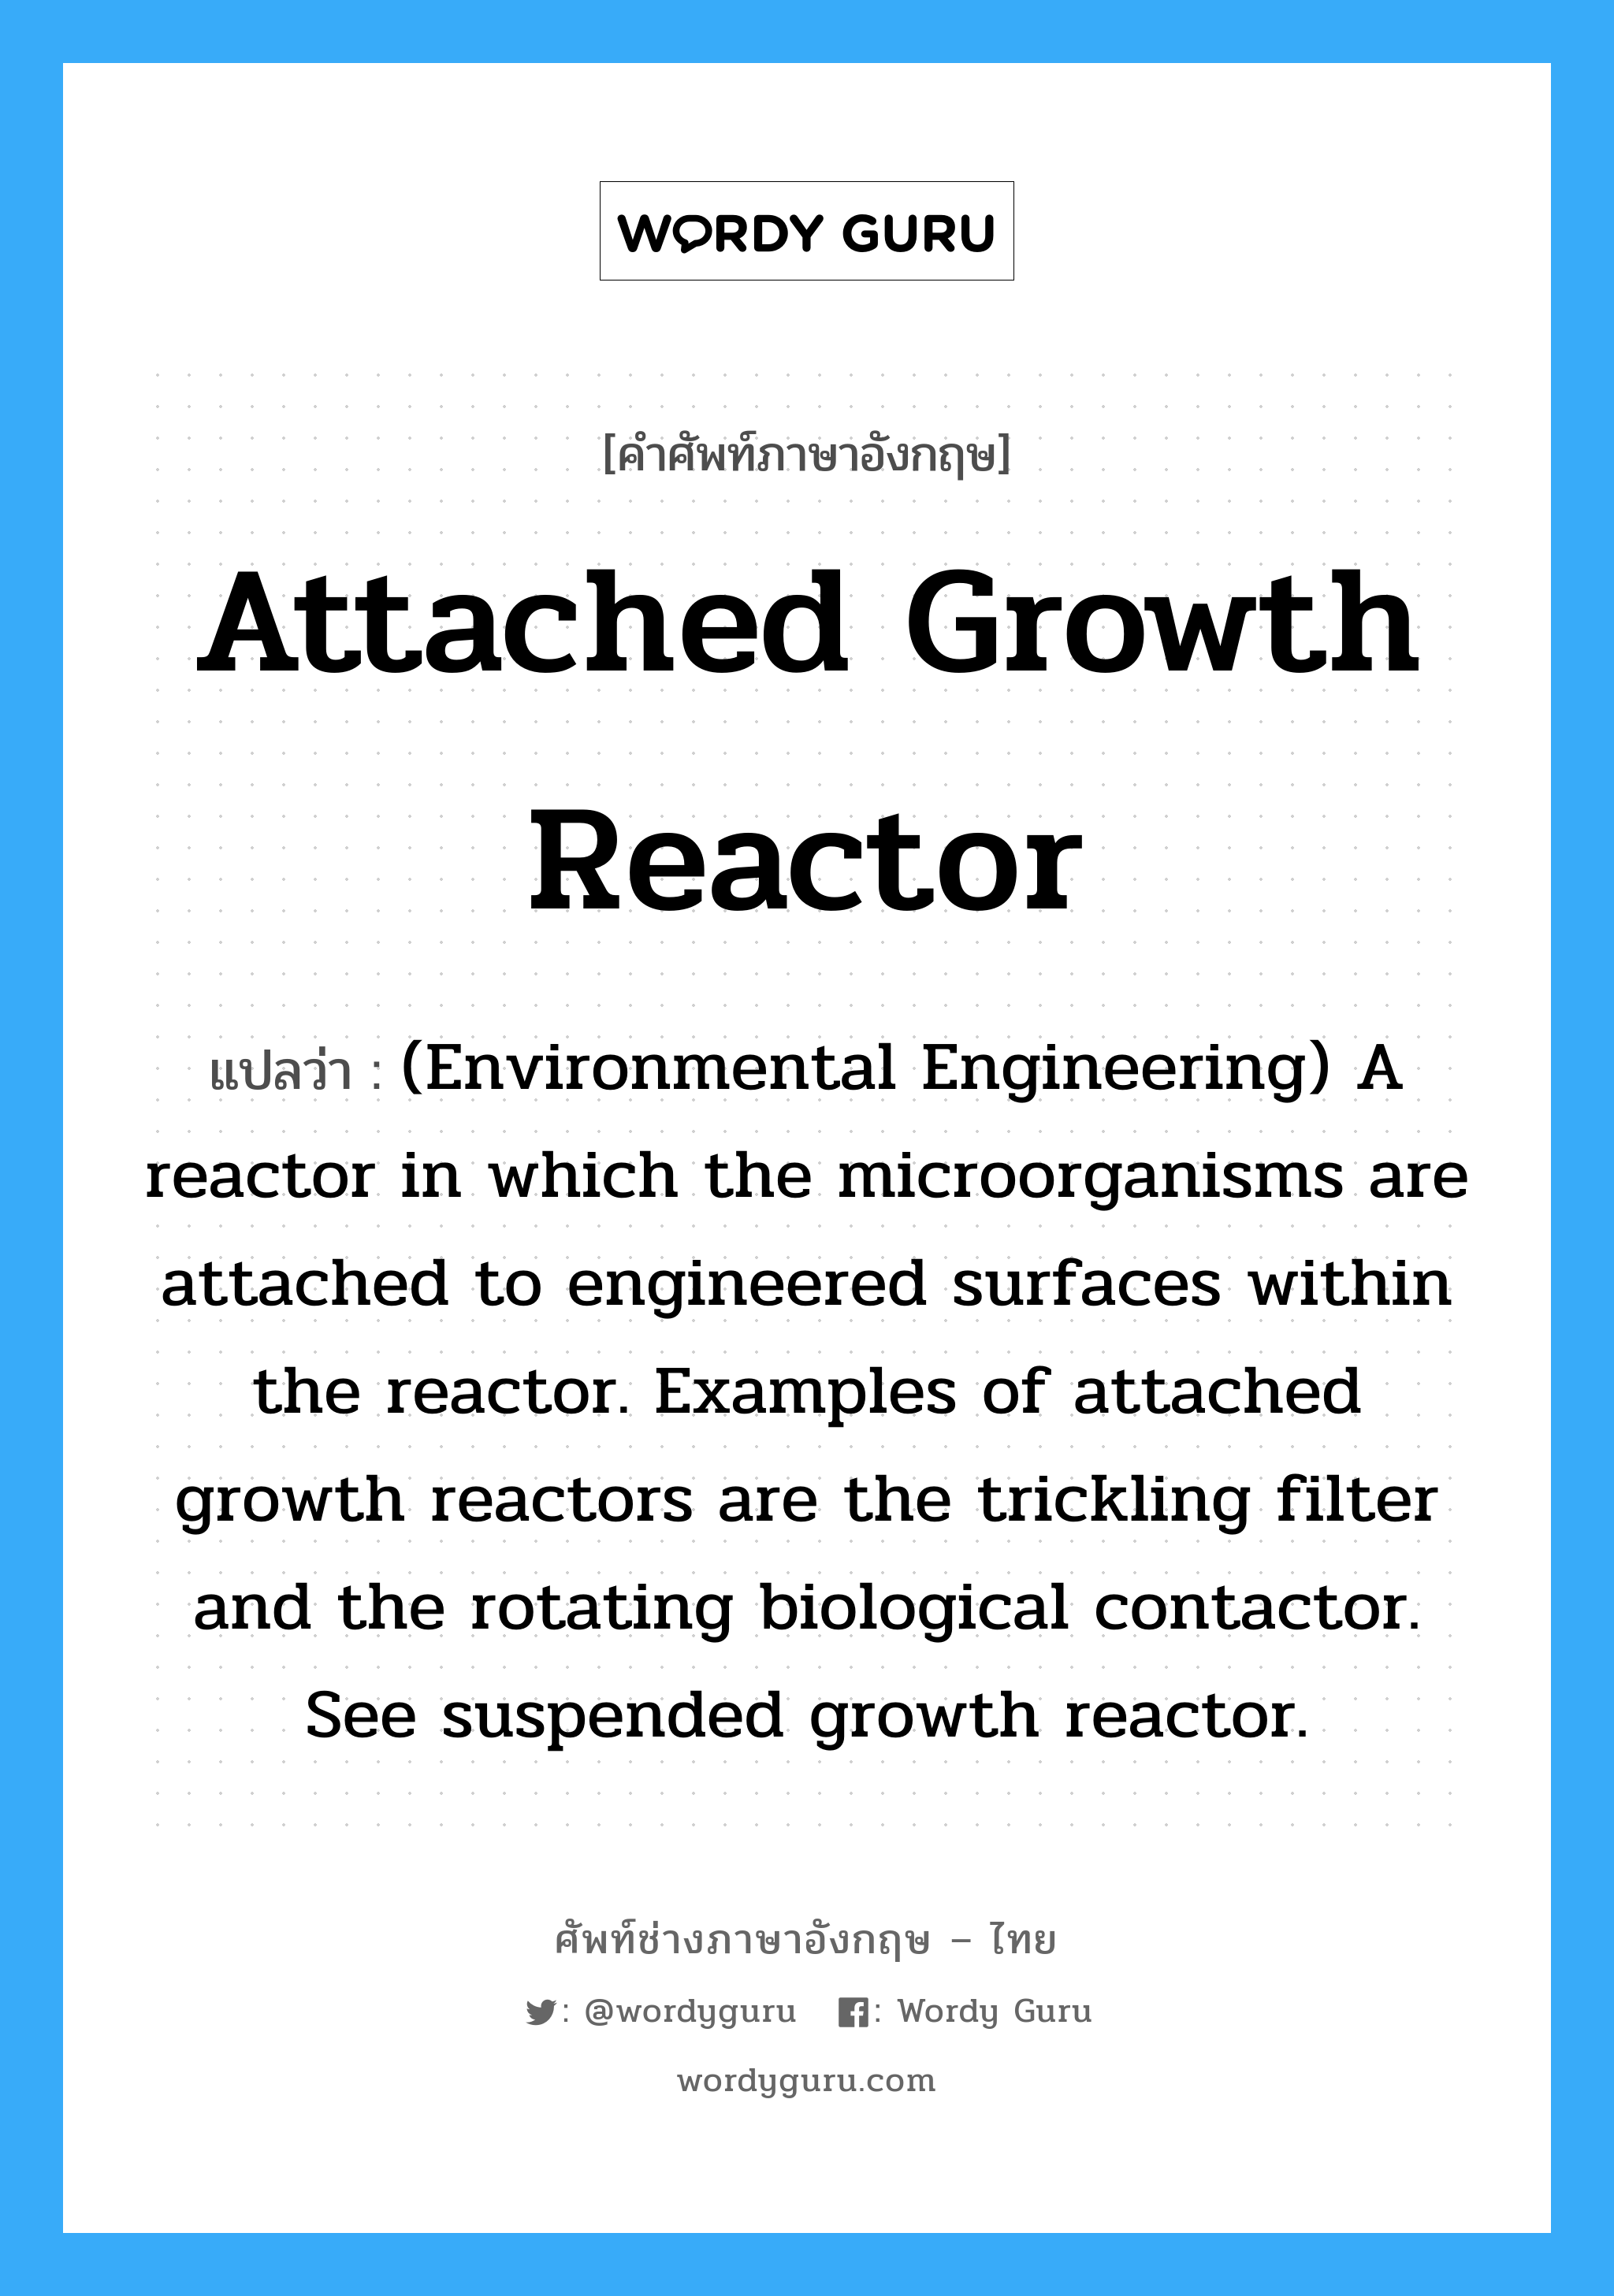 (Environmental Engineering) A reactor in which the microorganisms are suspended in the wastewater. Examples of suspended growth reactors are activated sludge reactors and anaerobic digesters. See attached growth reactor. ภาษาอังกฤษ?, คำศัพท์ช่างภาษาอังกฤษ - ไทย (Environmental Engineering) A reactor in which the microorganisms are attached to engineered surfaces within the reactor. Examples of attached growth reactors are the trickling filter and the rotating biological contactor. See suspended growth reactor. คำศัพท์ภาษาอังกฤษ (Environmental Engineering) A reactor in which the microorganisms are attached to engineered surfaces within the reactor. Examples of attached growth reactors are the trickling filter and the rotating biological contactor. See suspended growth reactor. แปลว่า Attached growth reactor